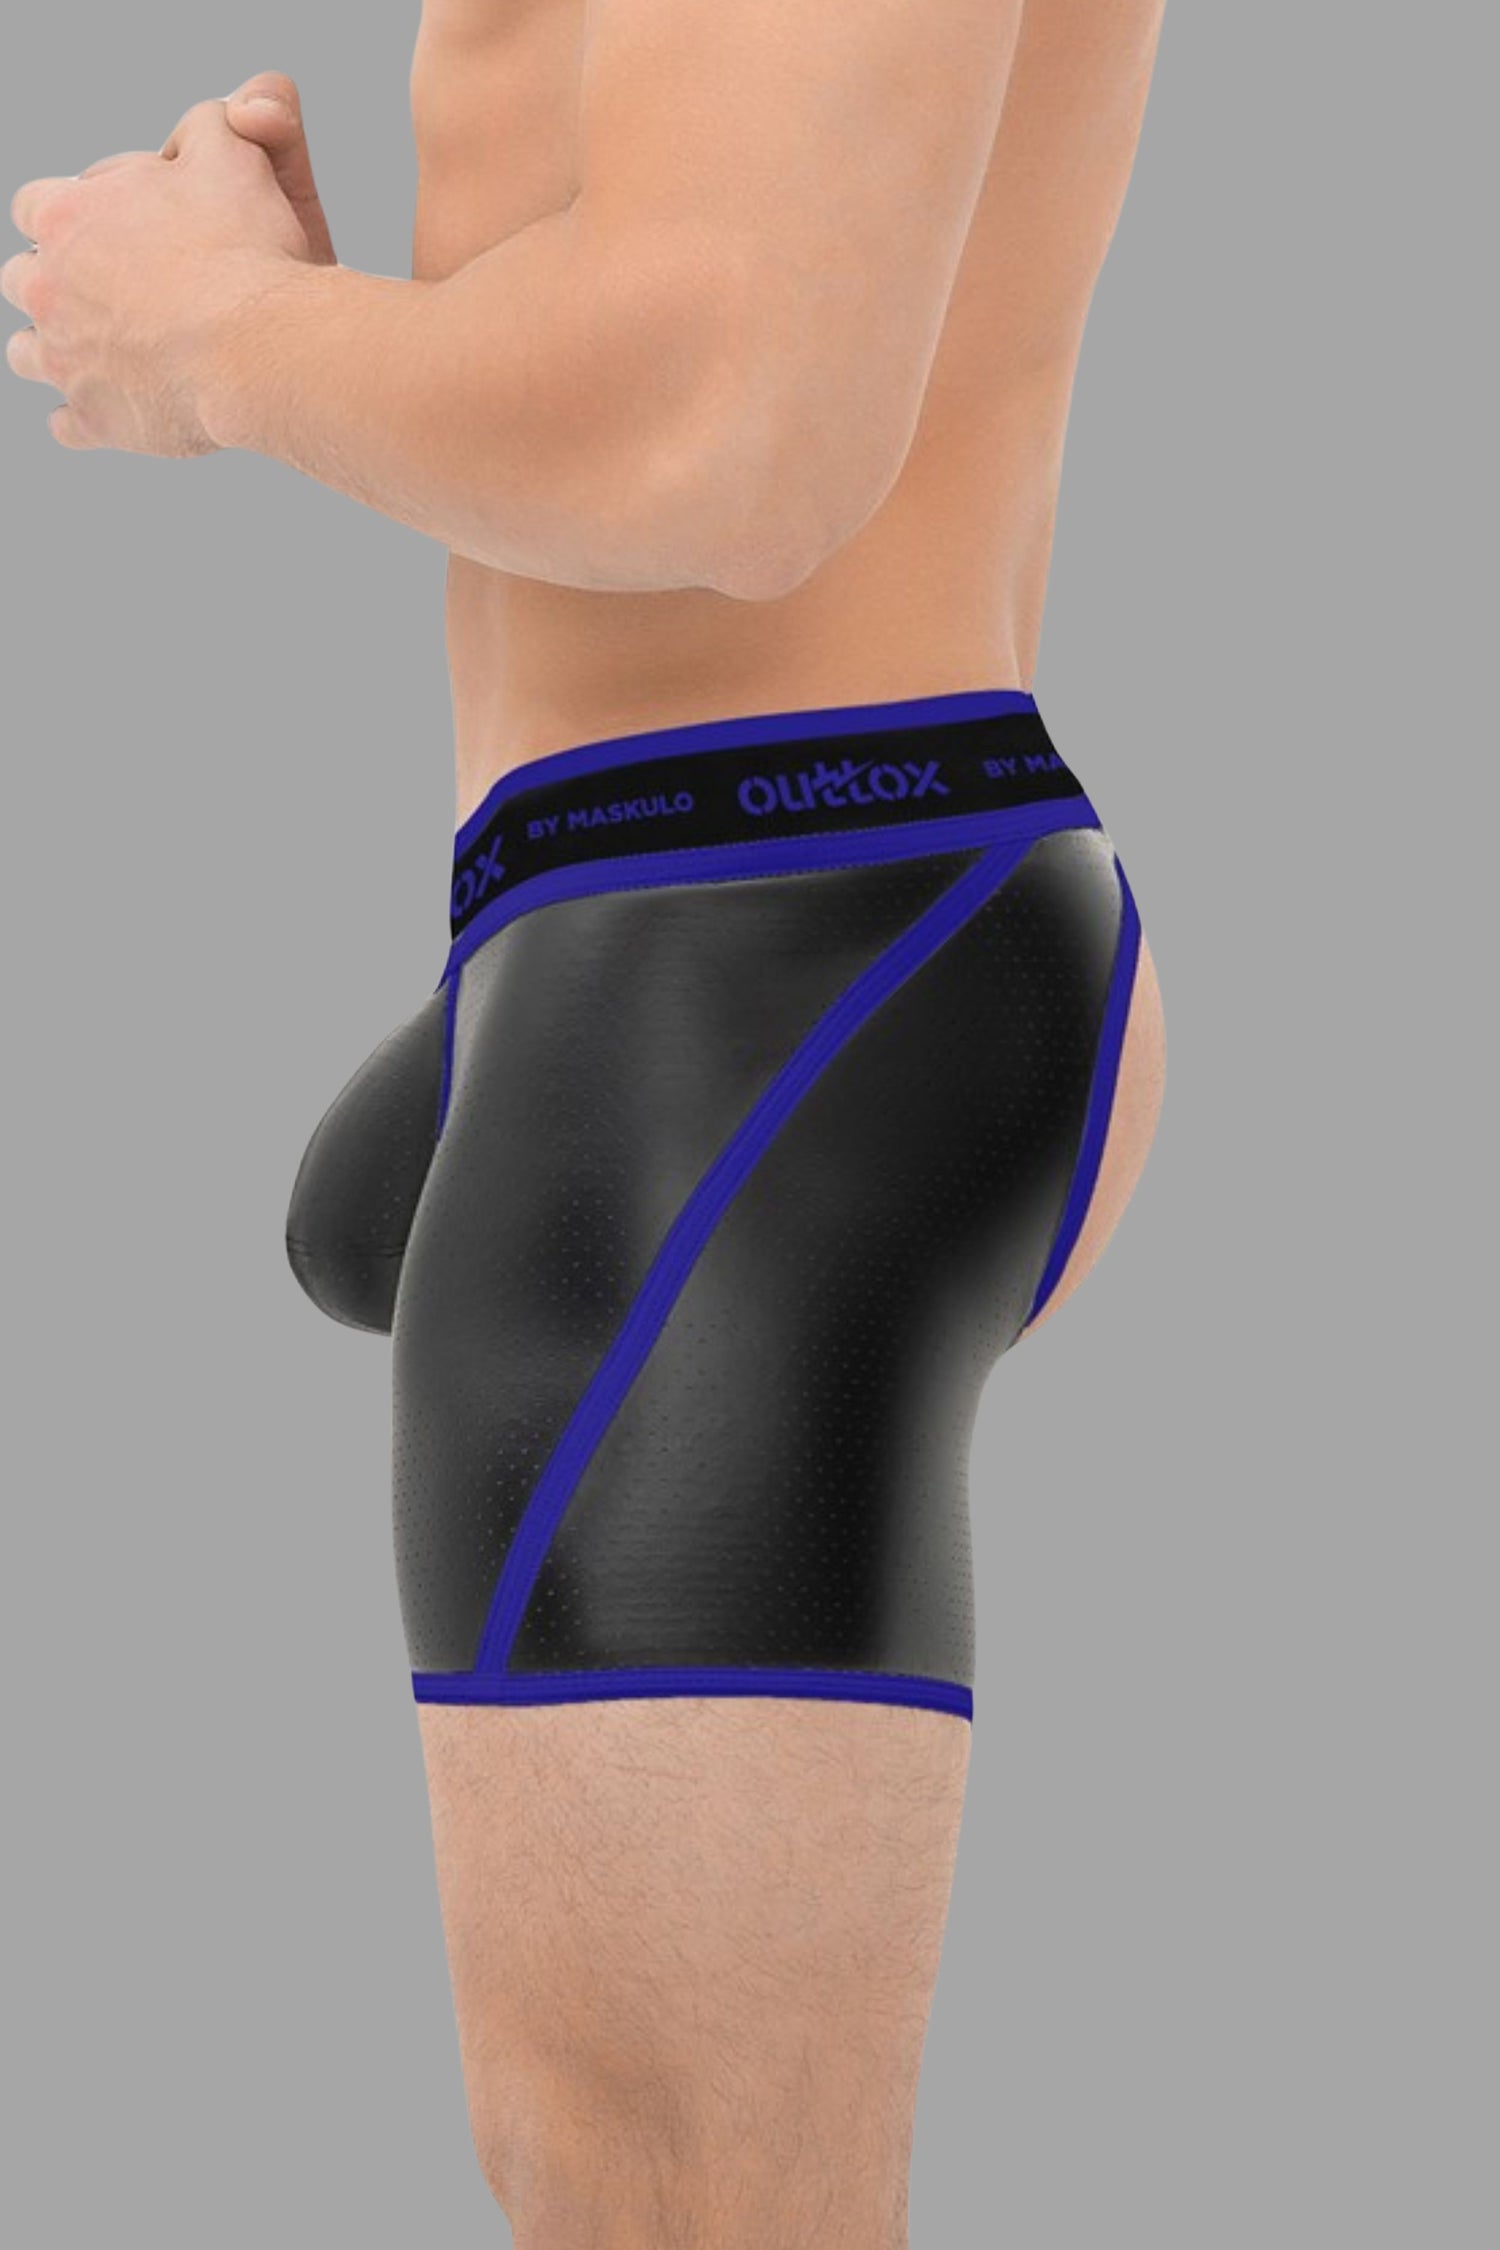 Outtox. Open Rear Shorts with Snap Codpiece. Blue